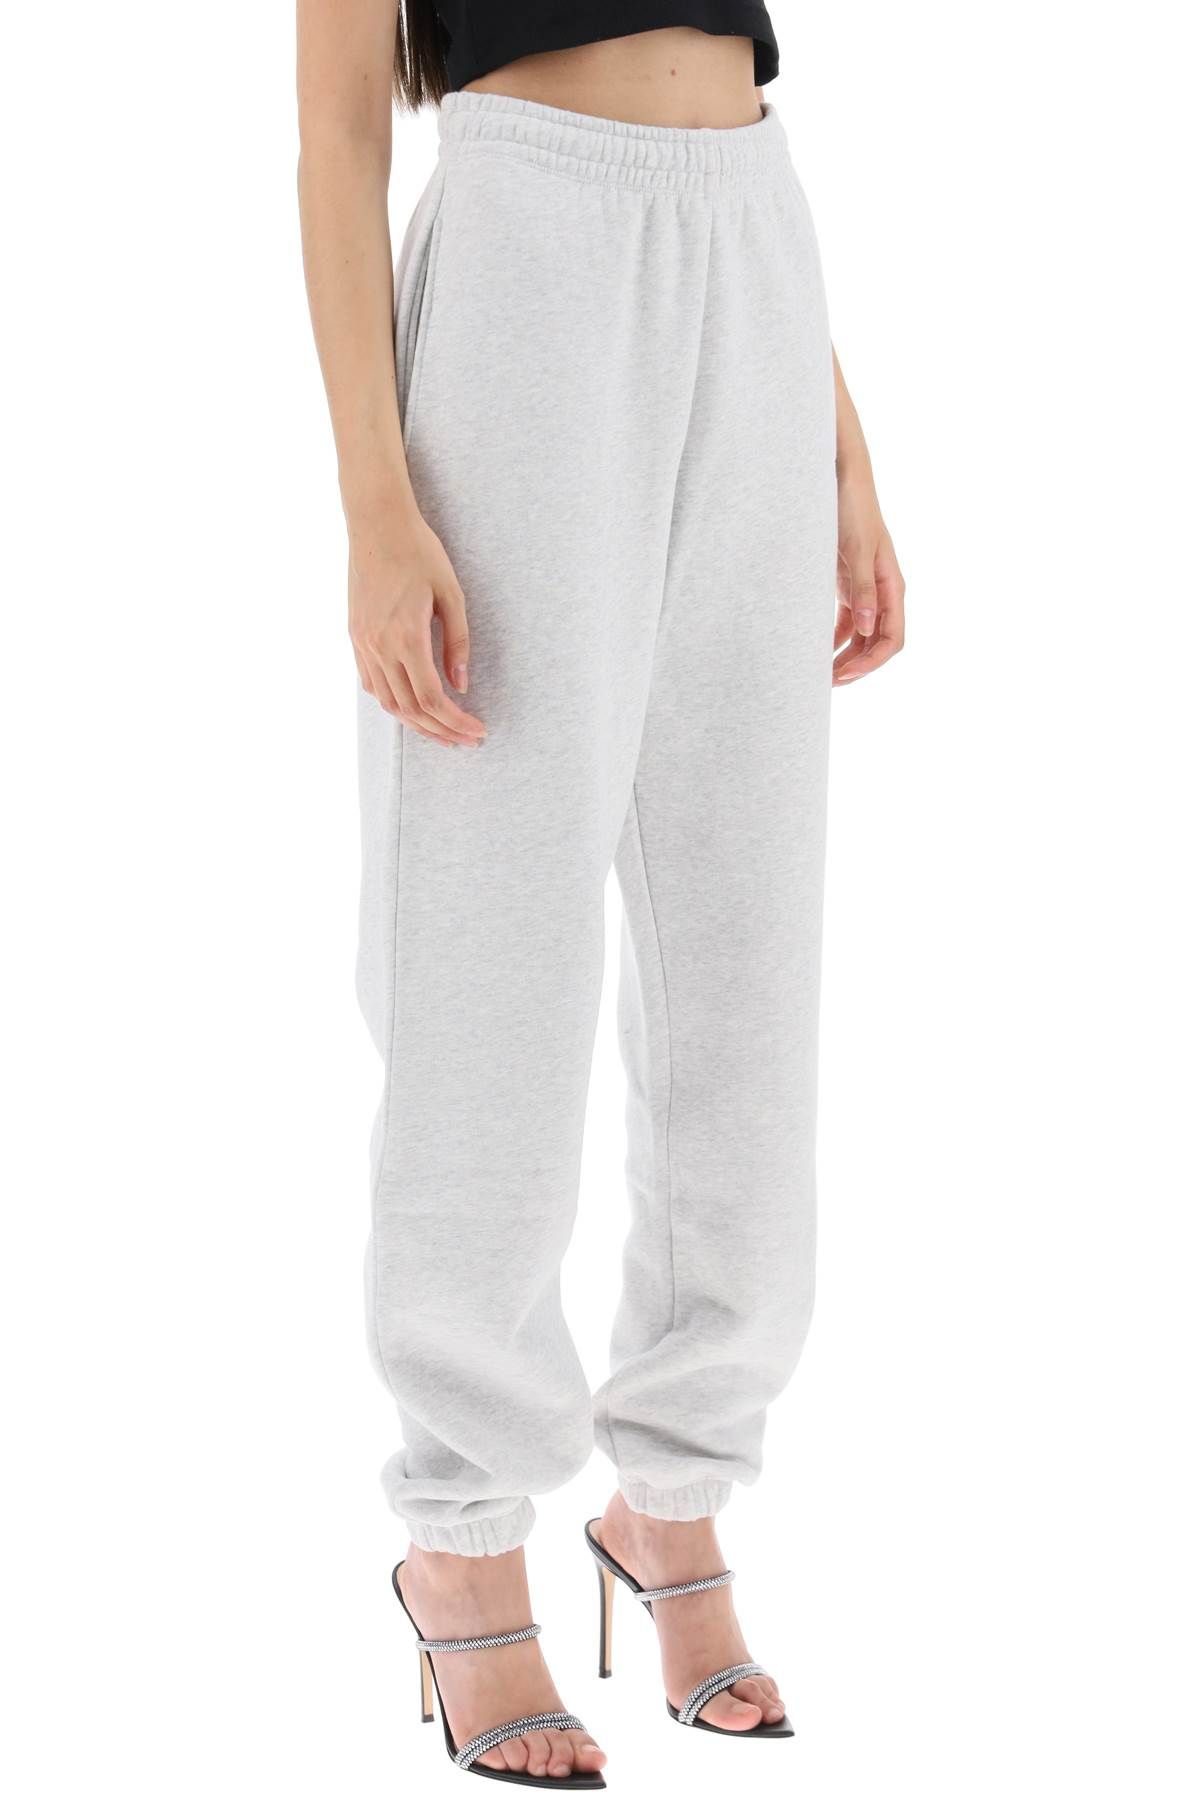 Shop Rotate Birger Christensen Joggers With Embroidered Logo In Grey